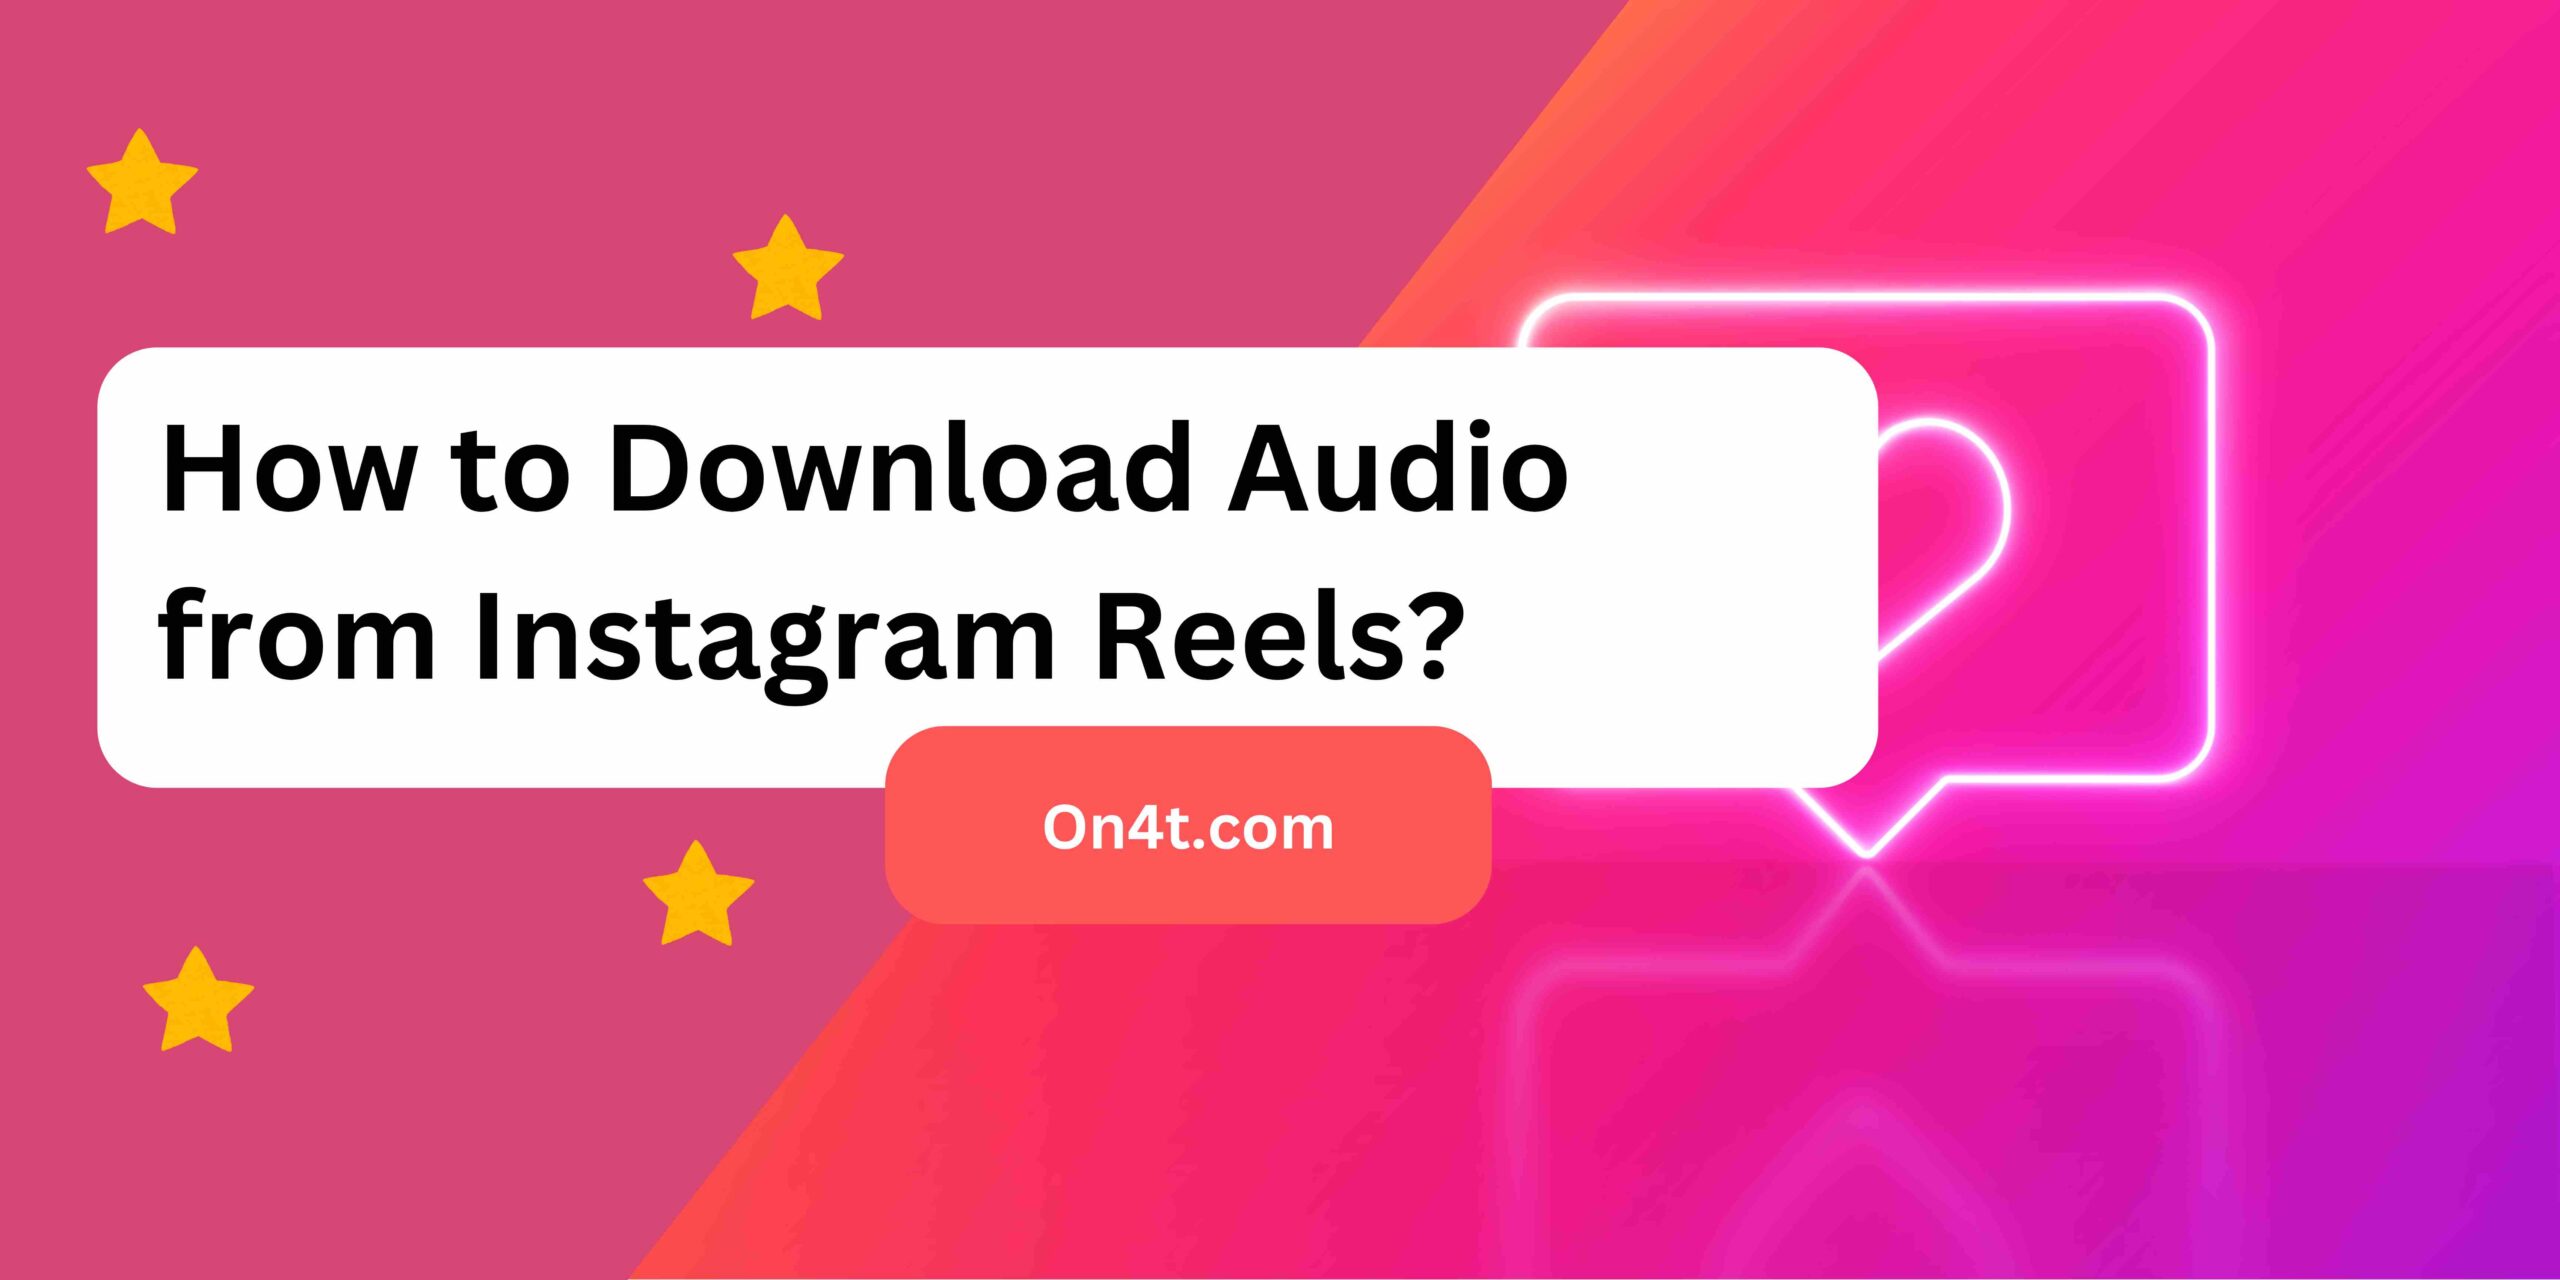 How to Download Audio from Instagram Reels